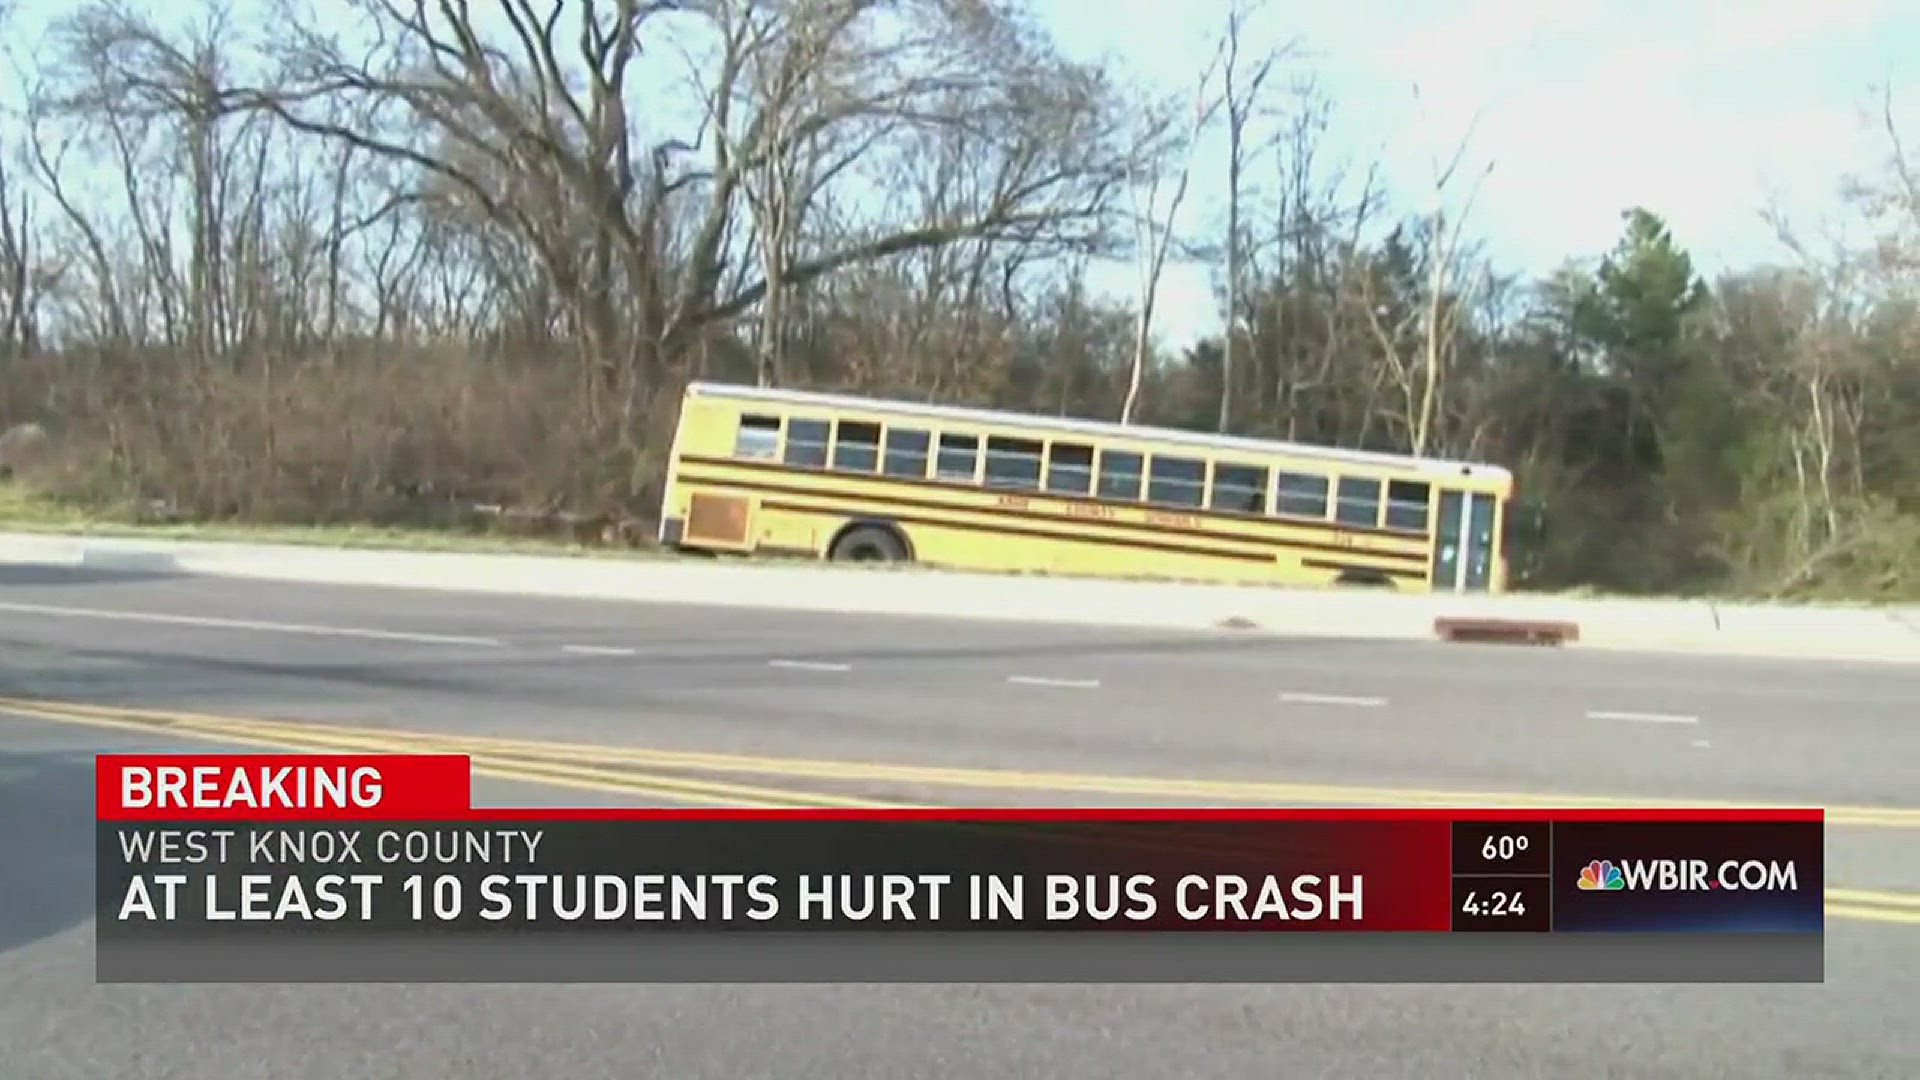 75 kids were on bus #114 from Cedar Bluff Elem. when the bus crashed off Cedar Bluff Road. At least 10 kids were transported to the hospital for minor injuries.